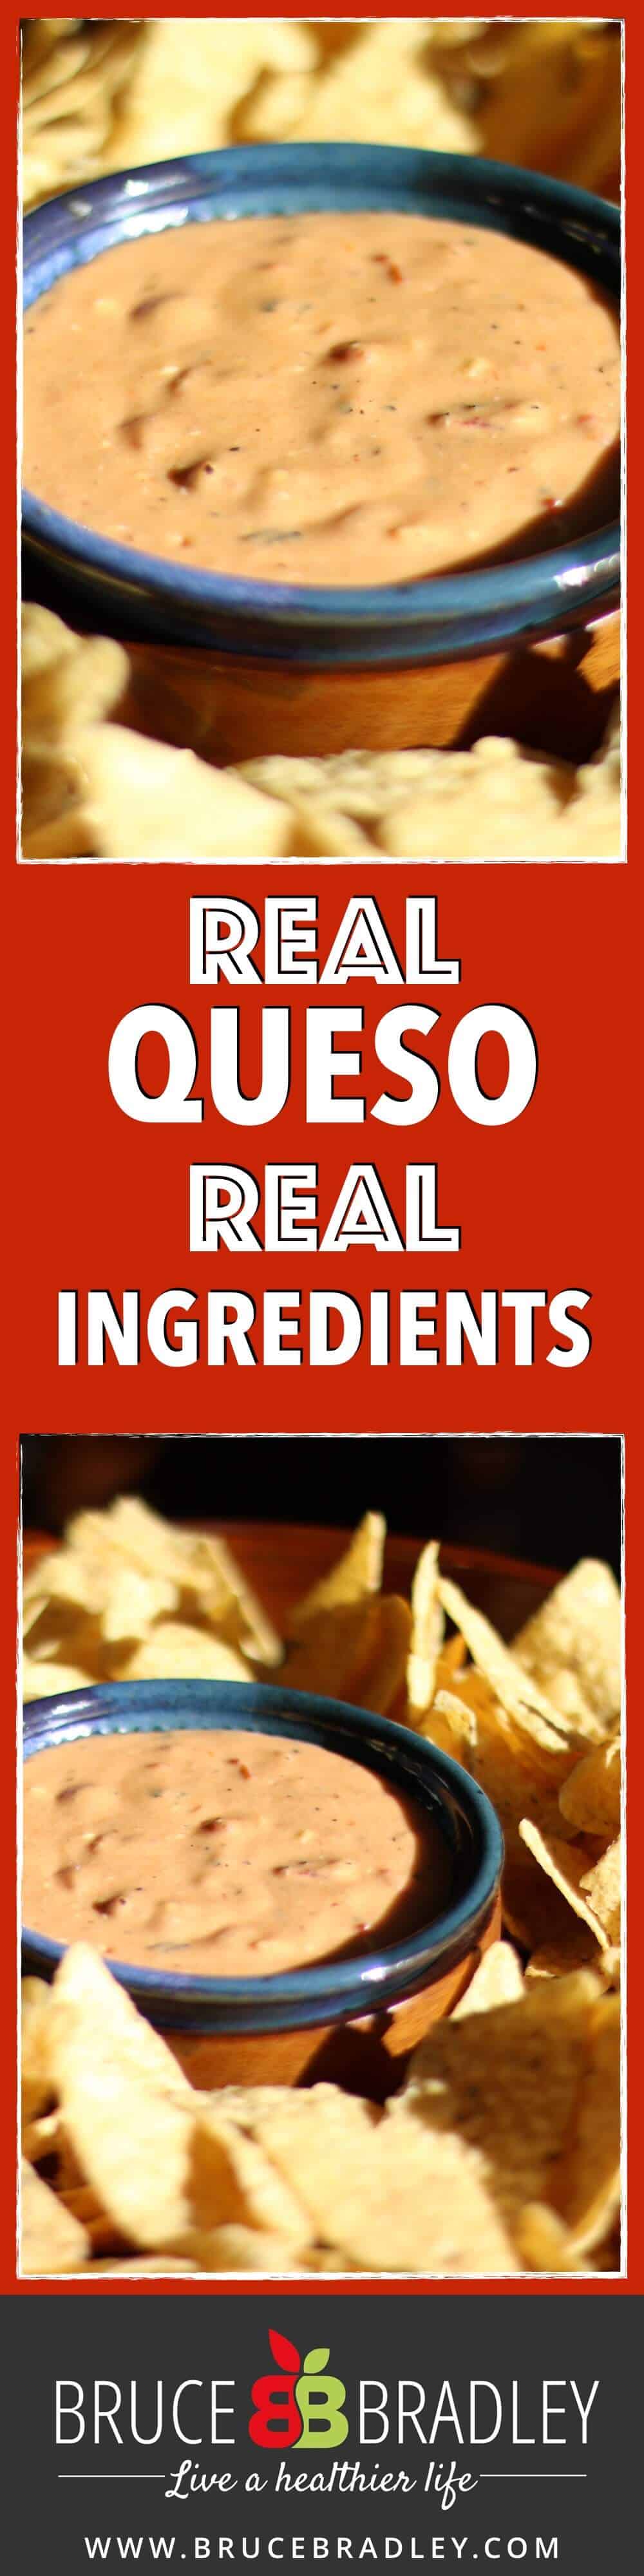 Bruce Bradley'S Homemade Queso Uses Only Real Ingredients